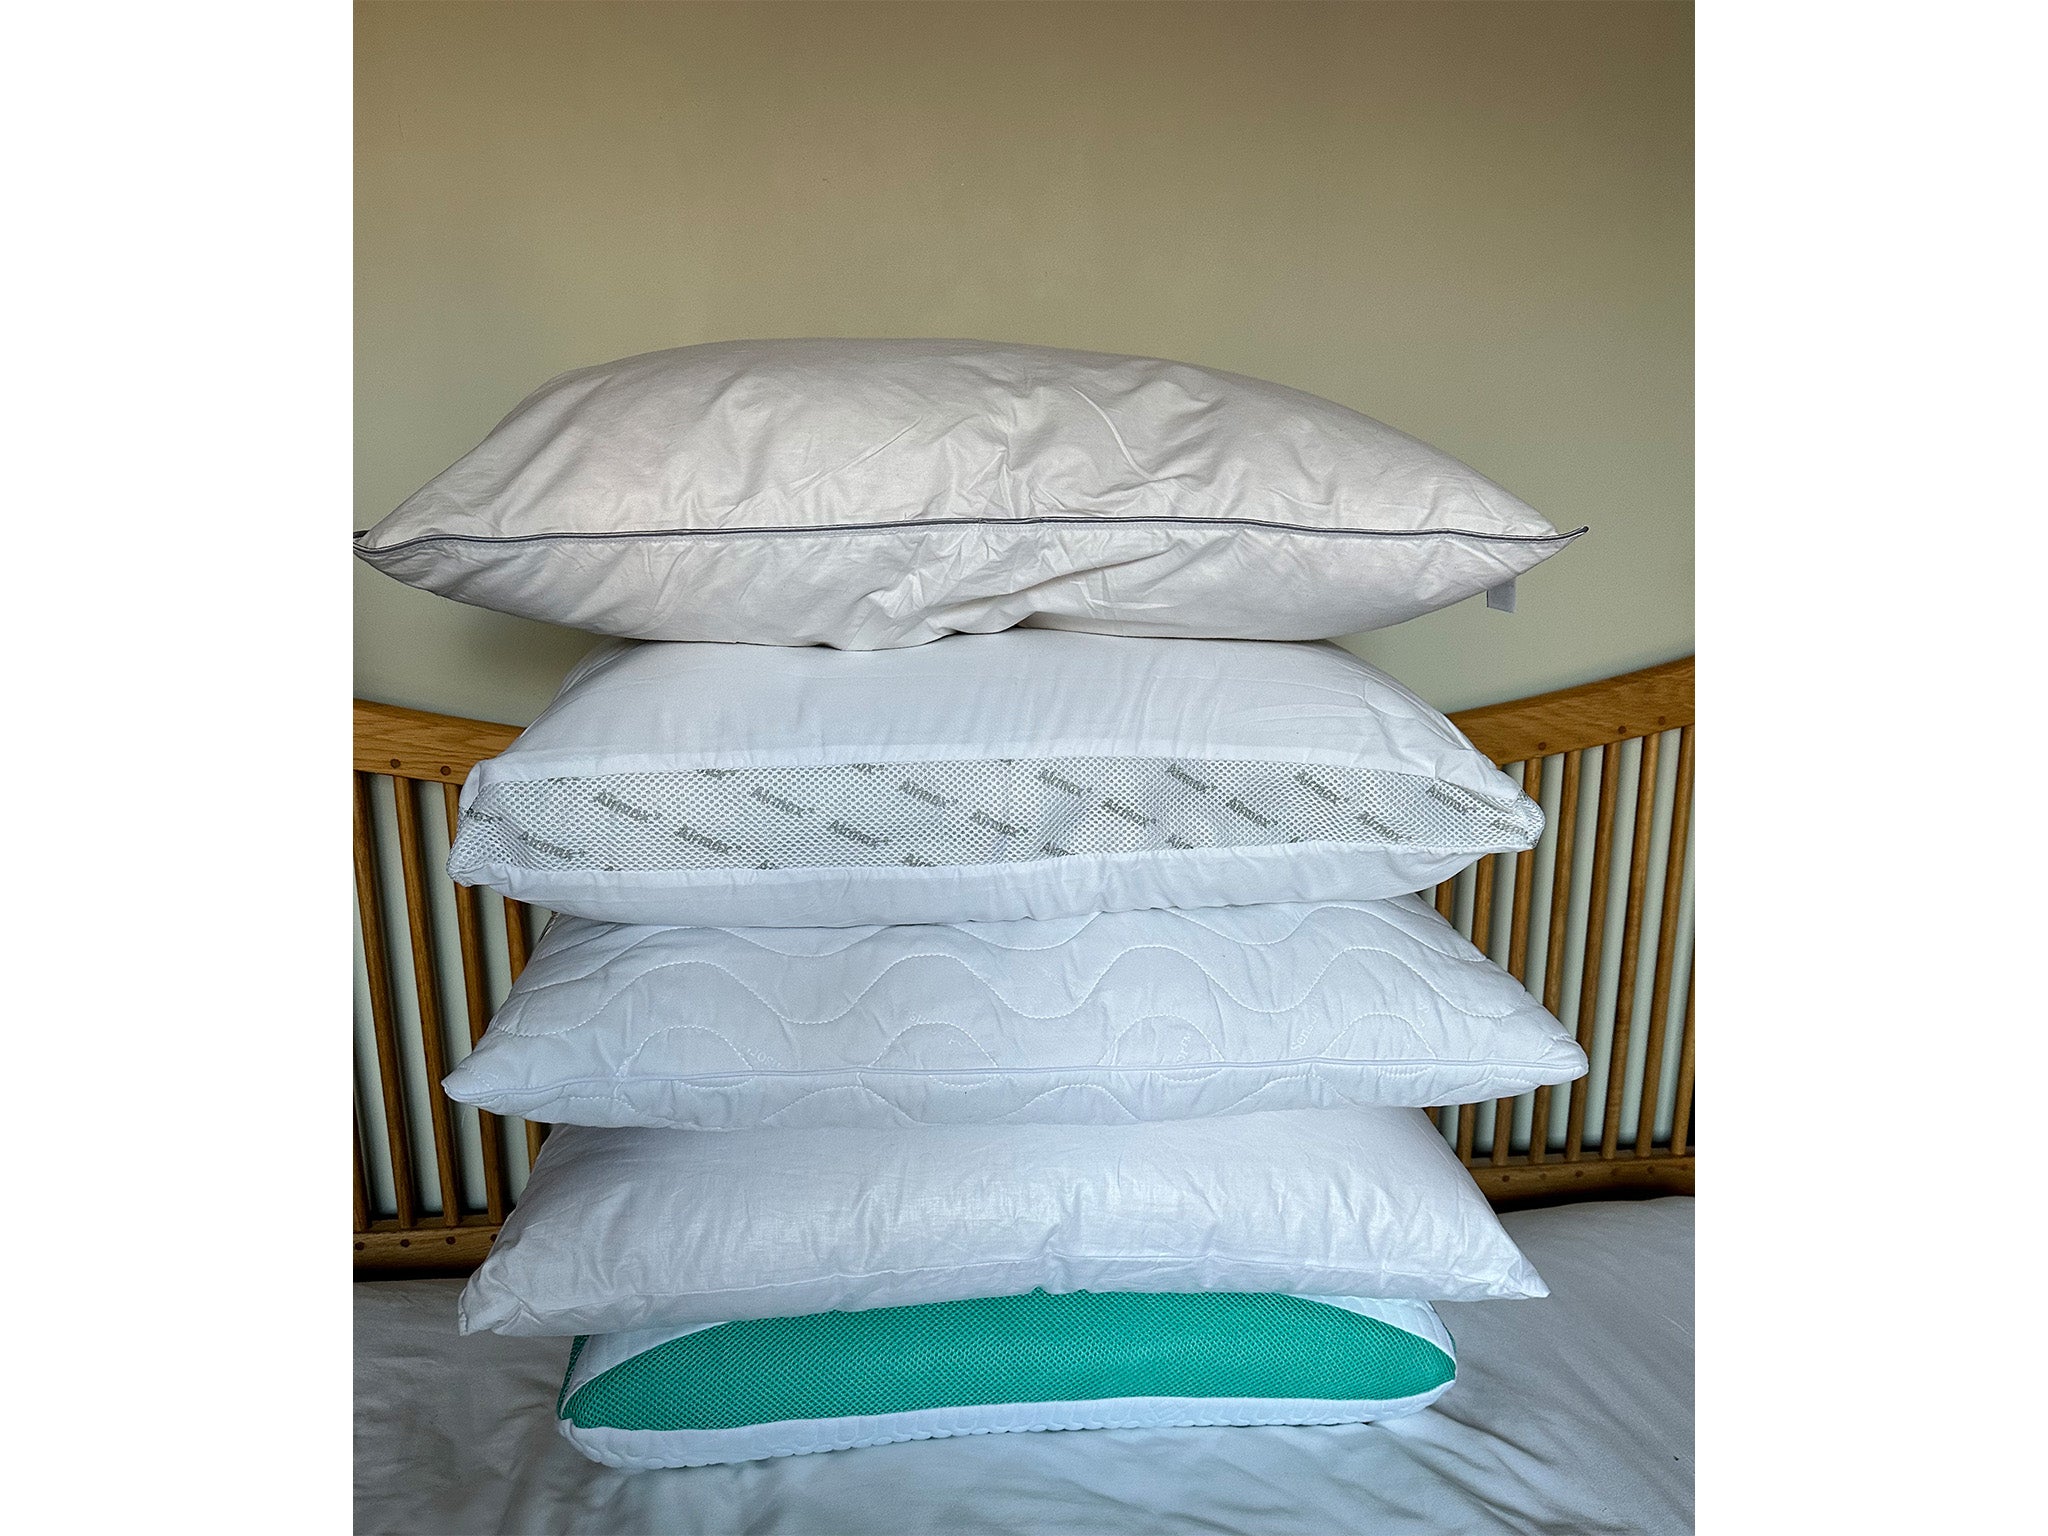 https://static.independent.co.uk/2023/02/14/11/Pillows.jpg